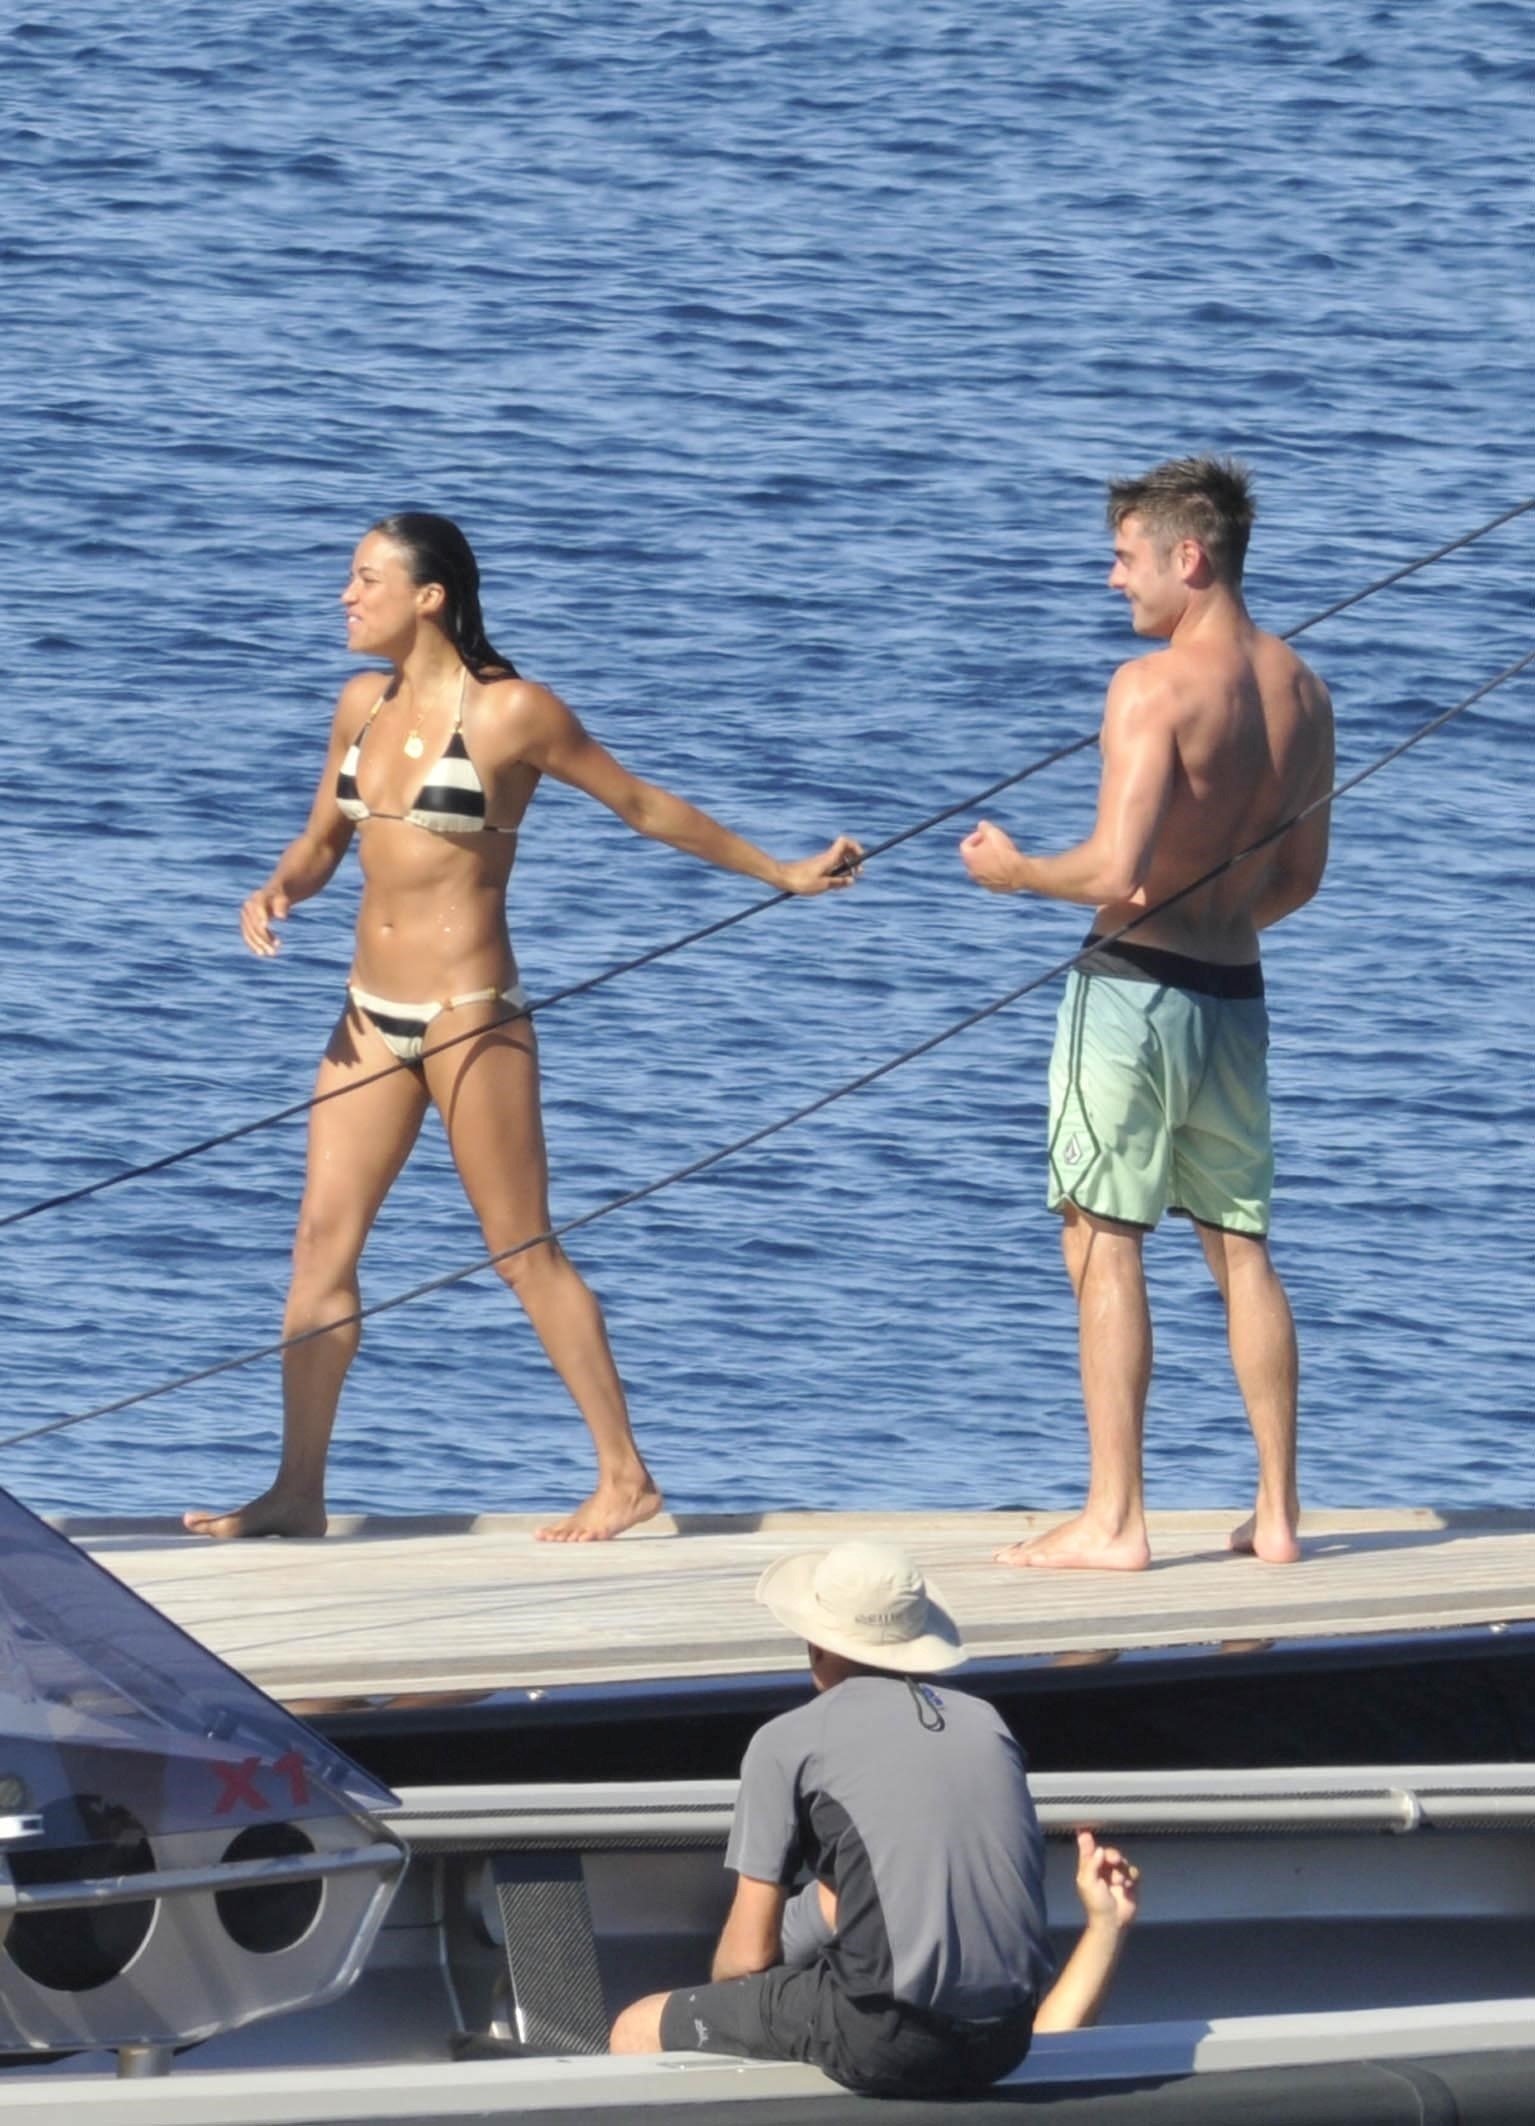 Michelle in a bikini and Zac in swim shorts by the water